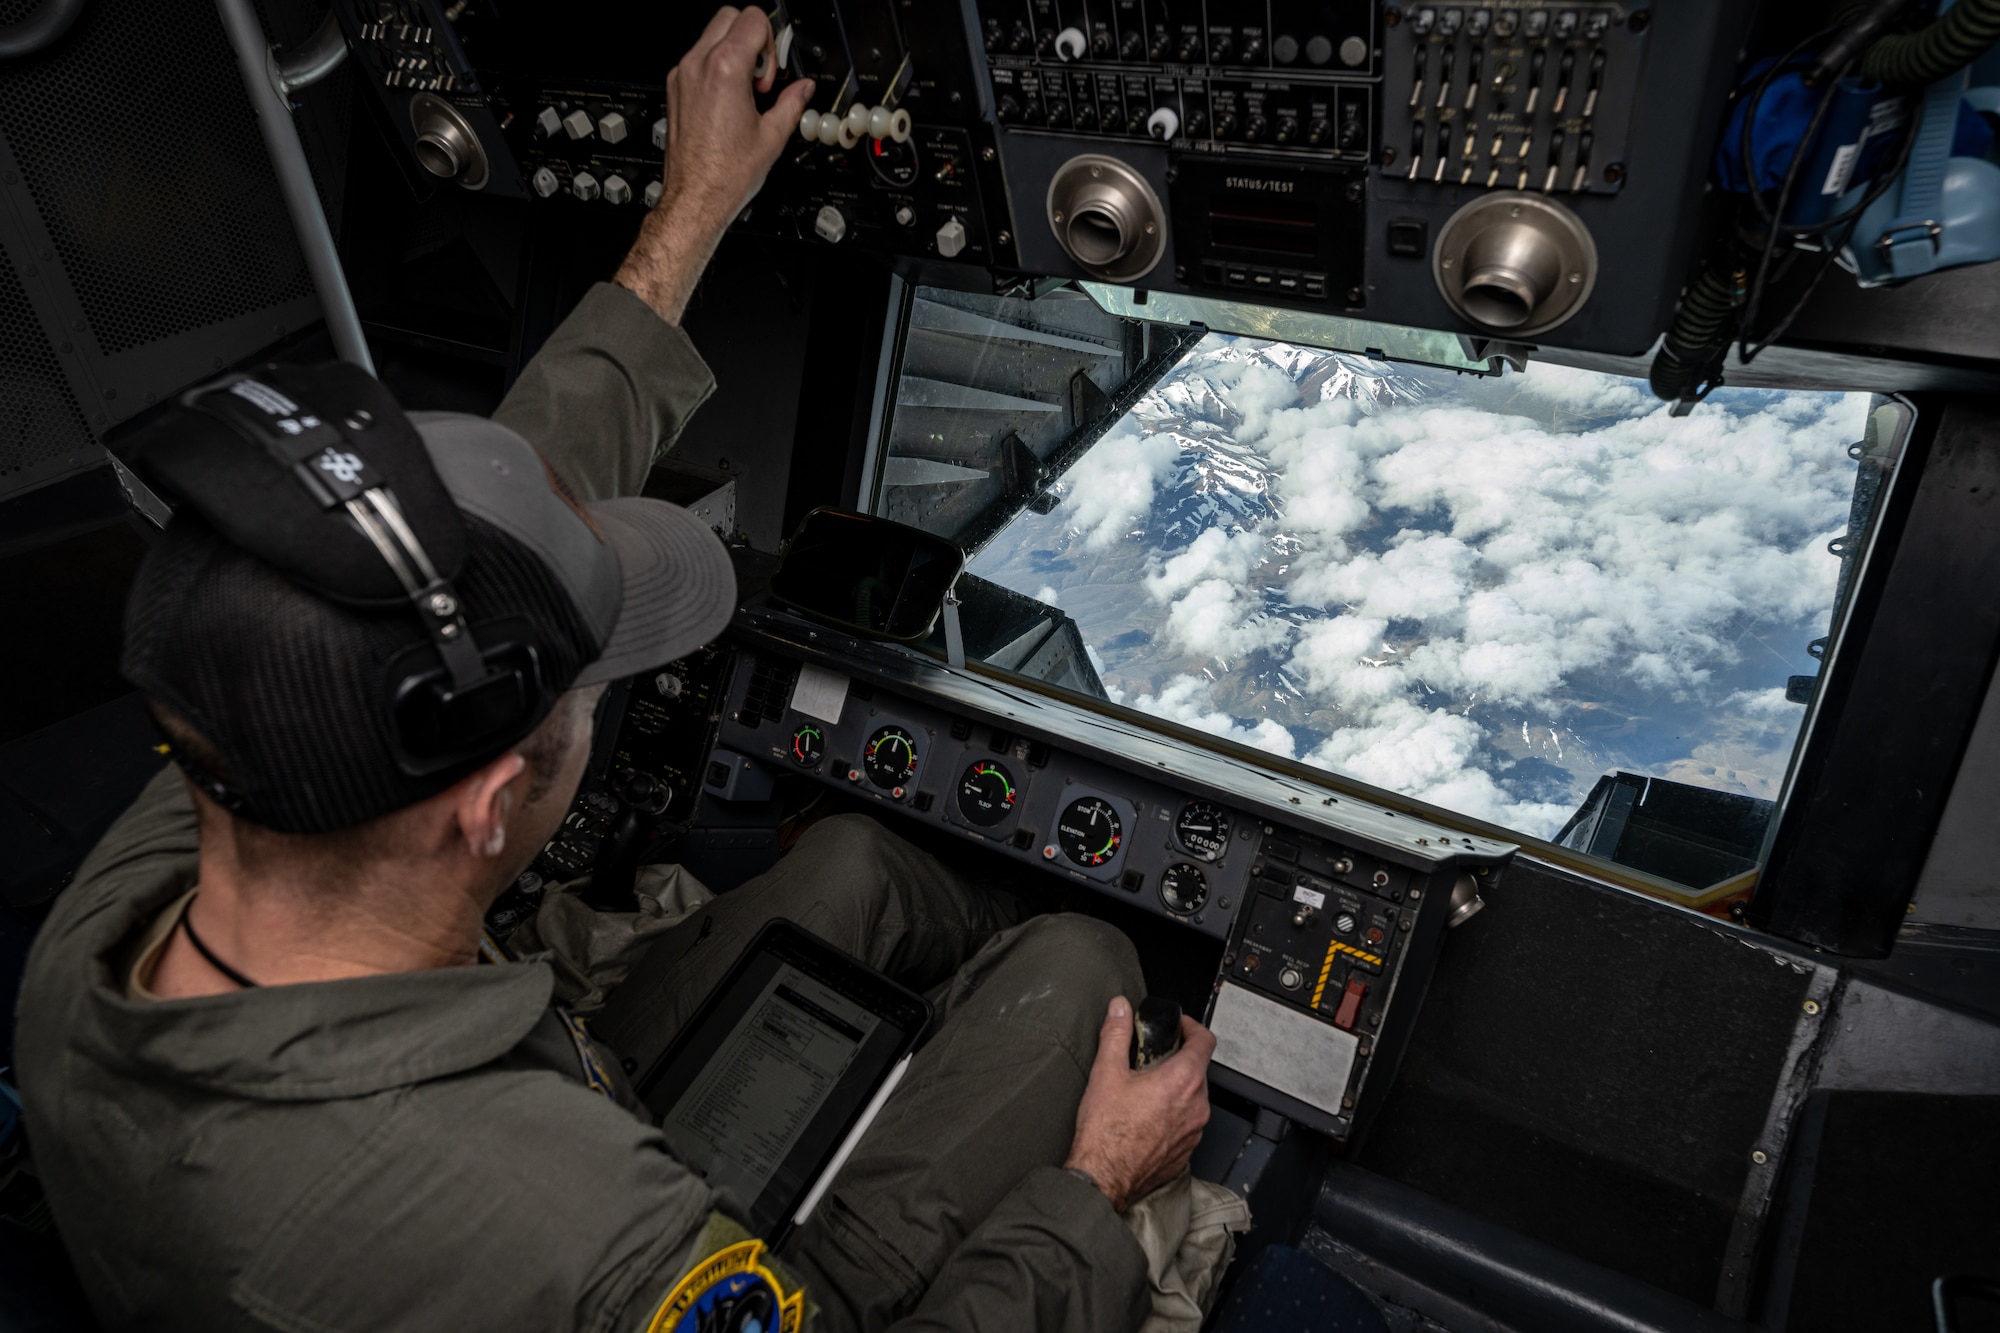 Over the shoulder of Master Sgt. Fortier looking at the snowy Sierra Nevada mountain range through the boom pod window